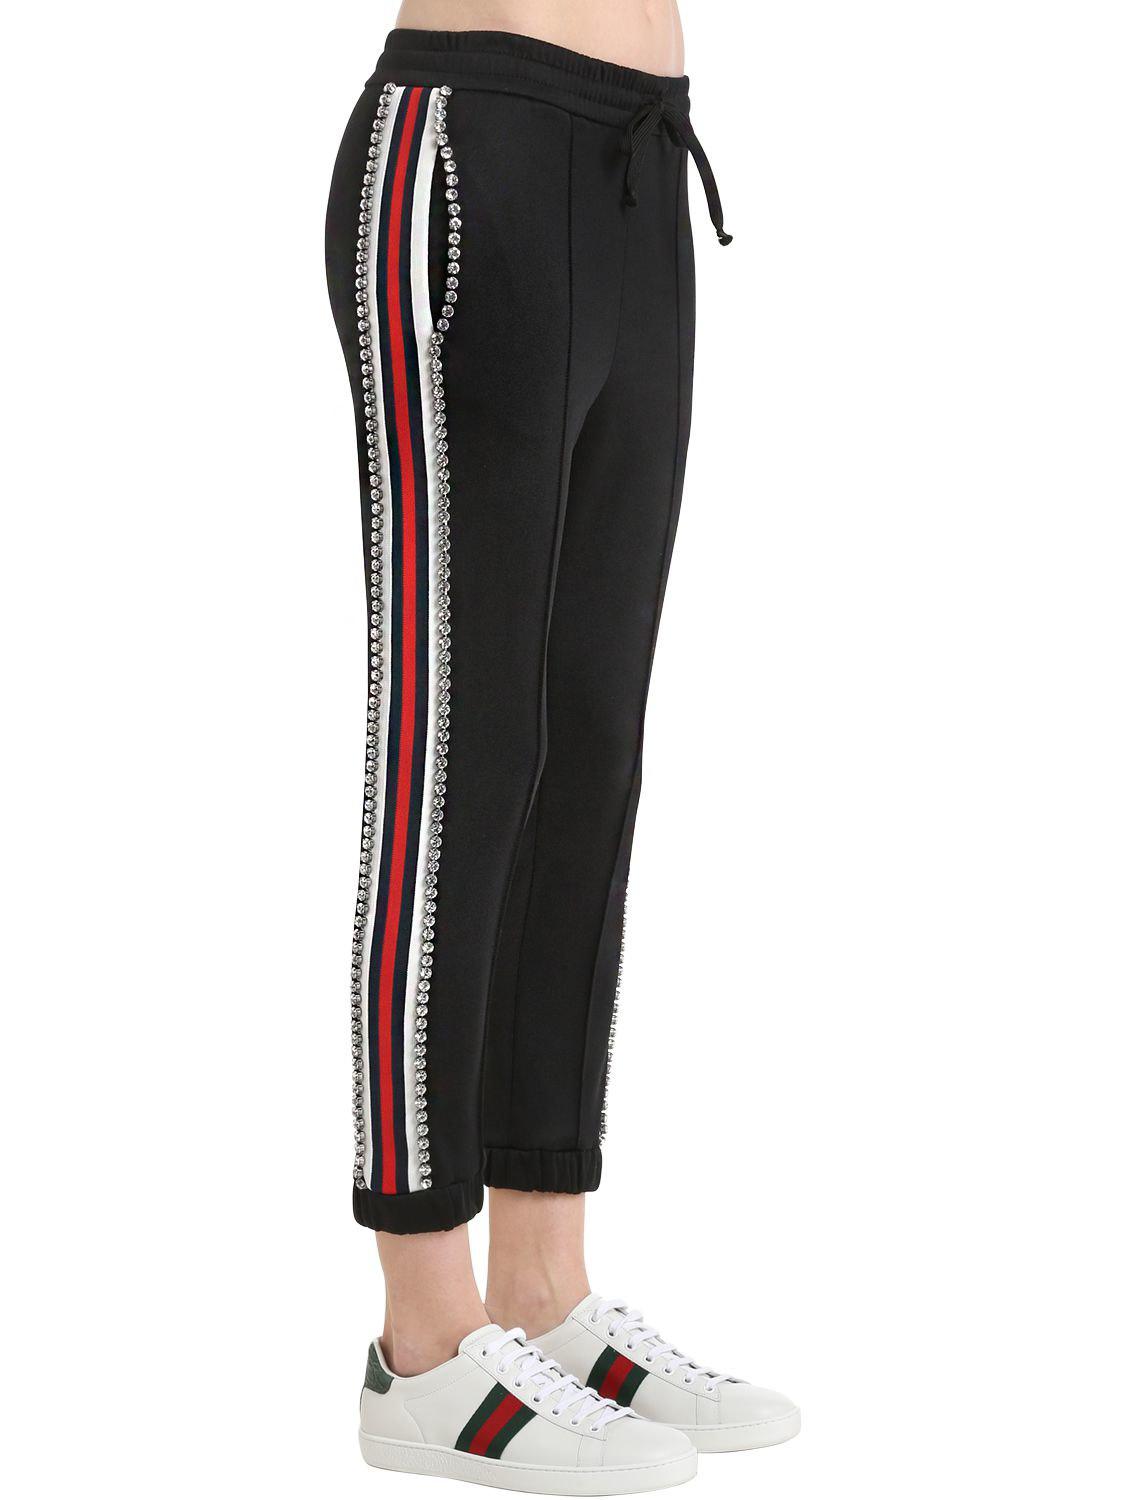 gucci track pants womens, OFF 74%,Buy!